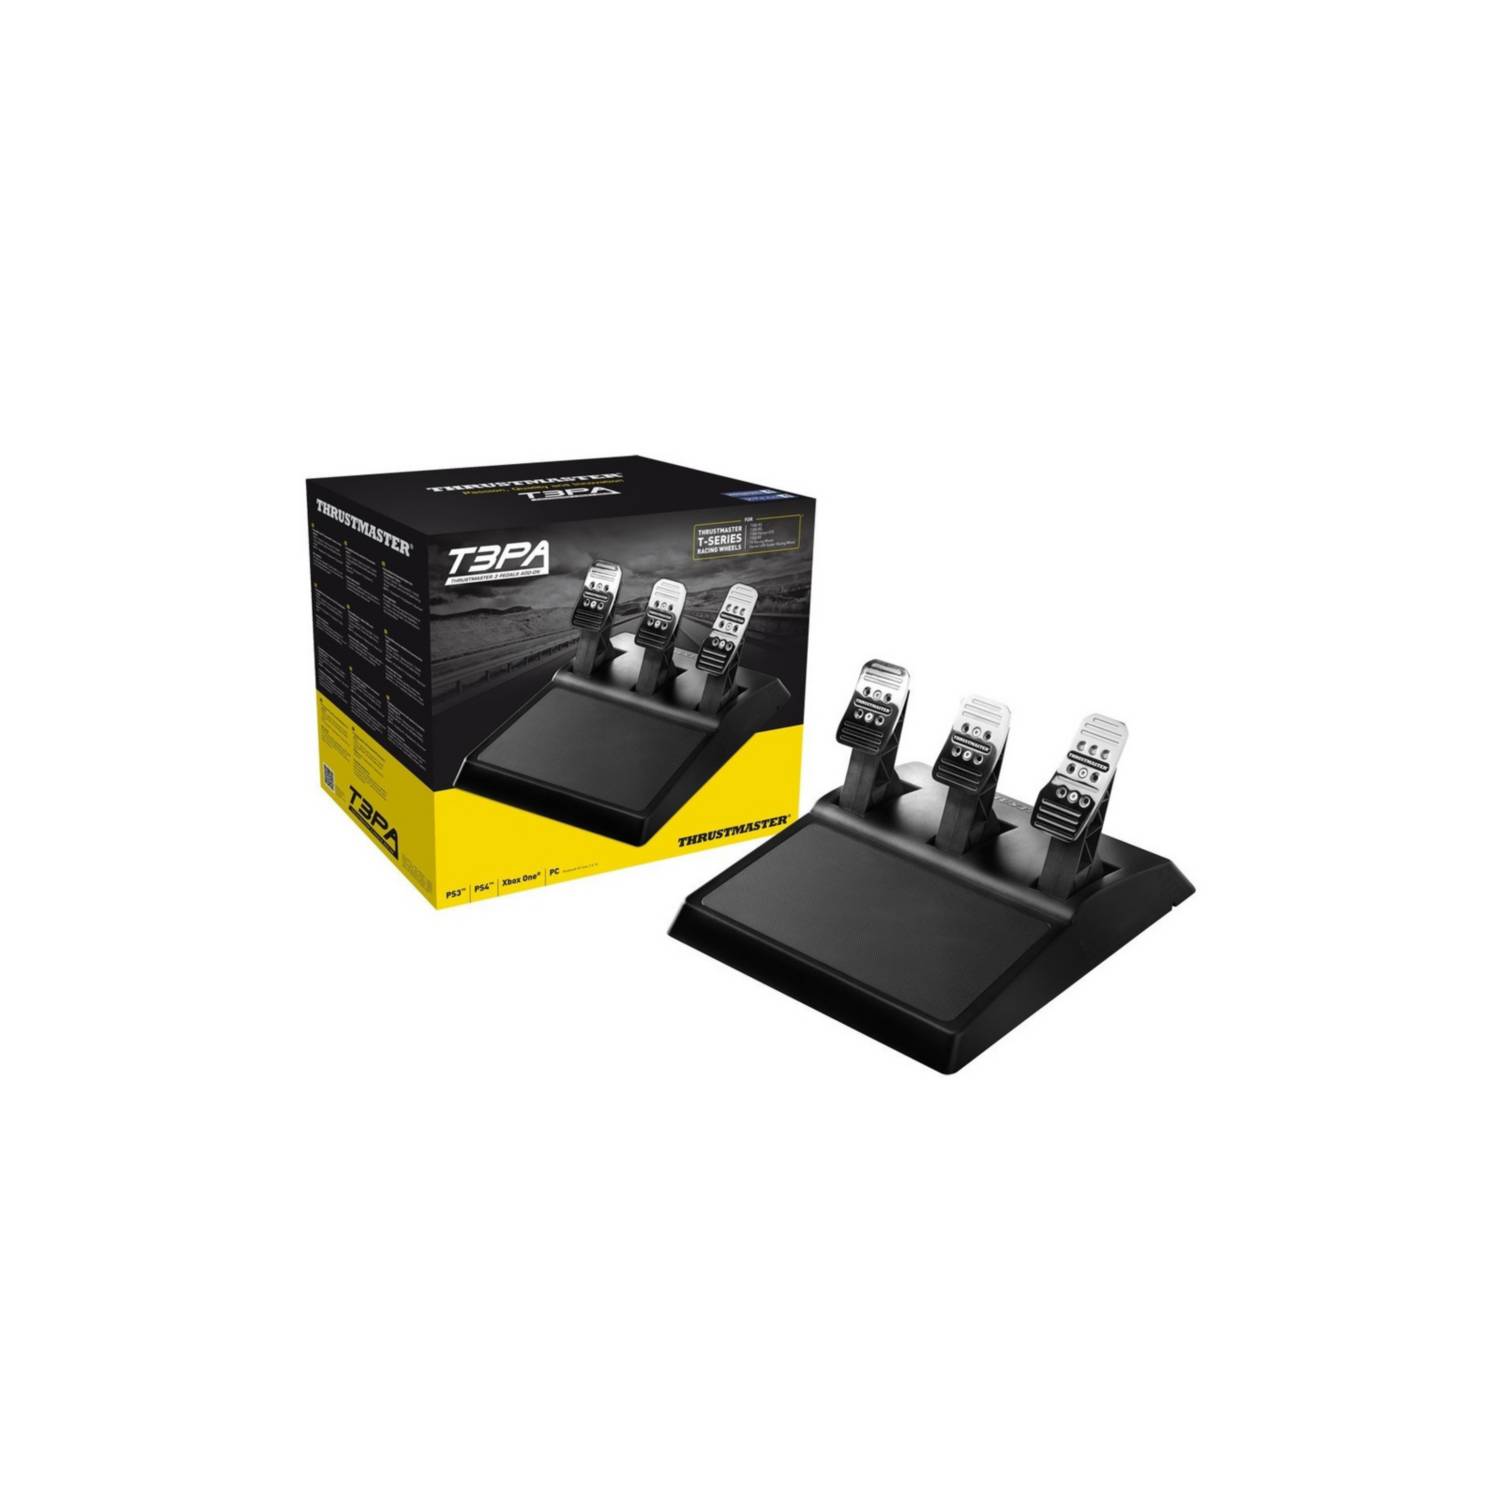 THRUSTMASTER Pedales T3PA add-on Thrustmaster PC/Xbox One/PS3/PS4  THRUSTMASTER